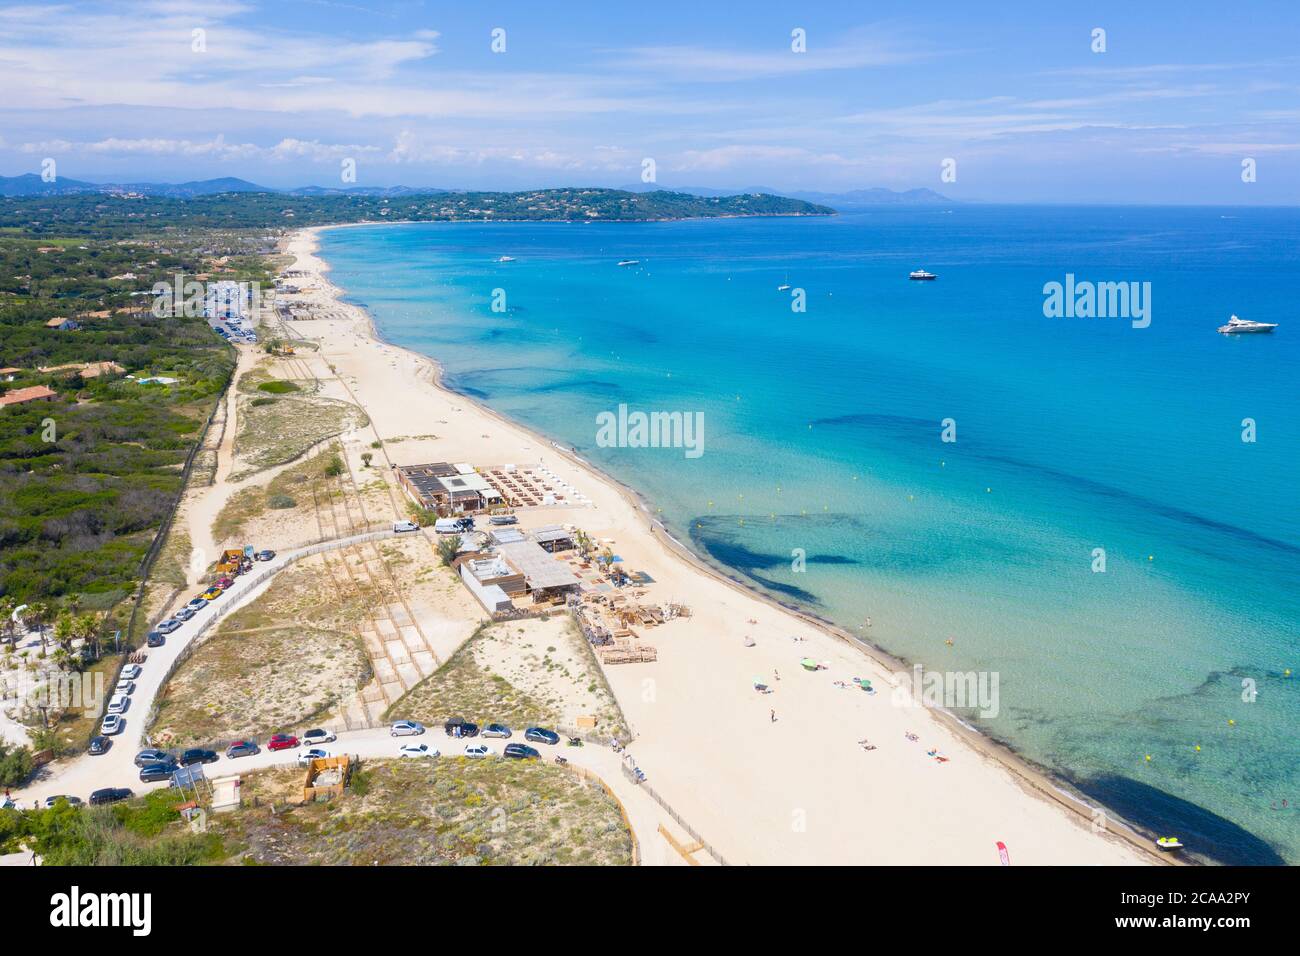 Var department, Ramatuelle - Saint Tropez, Aerial view of Pampelonne beach, the famous beach located on French Riviera Stock Photo